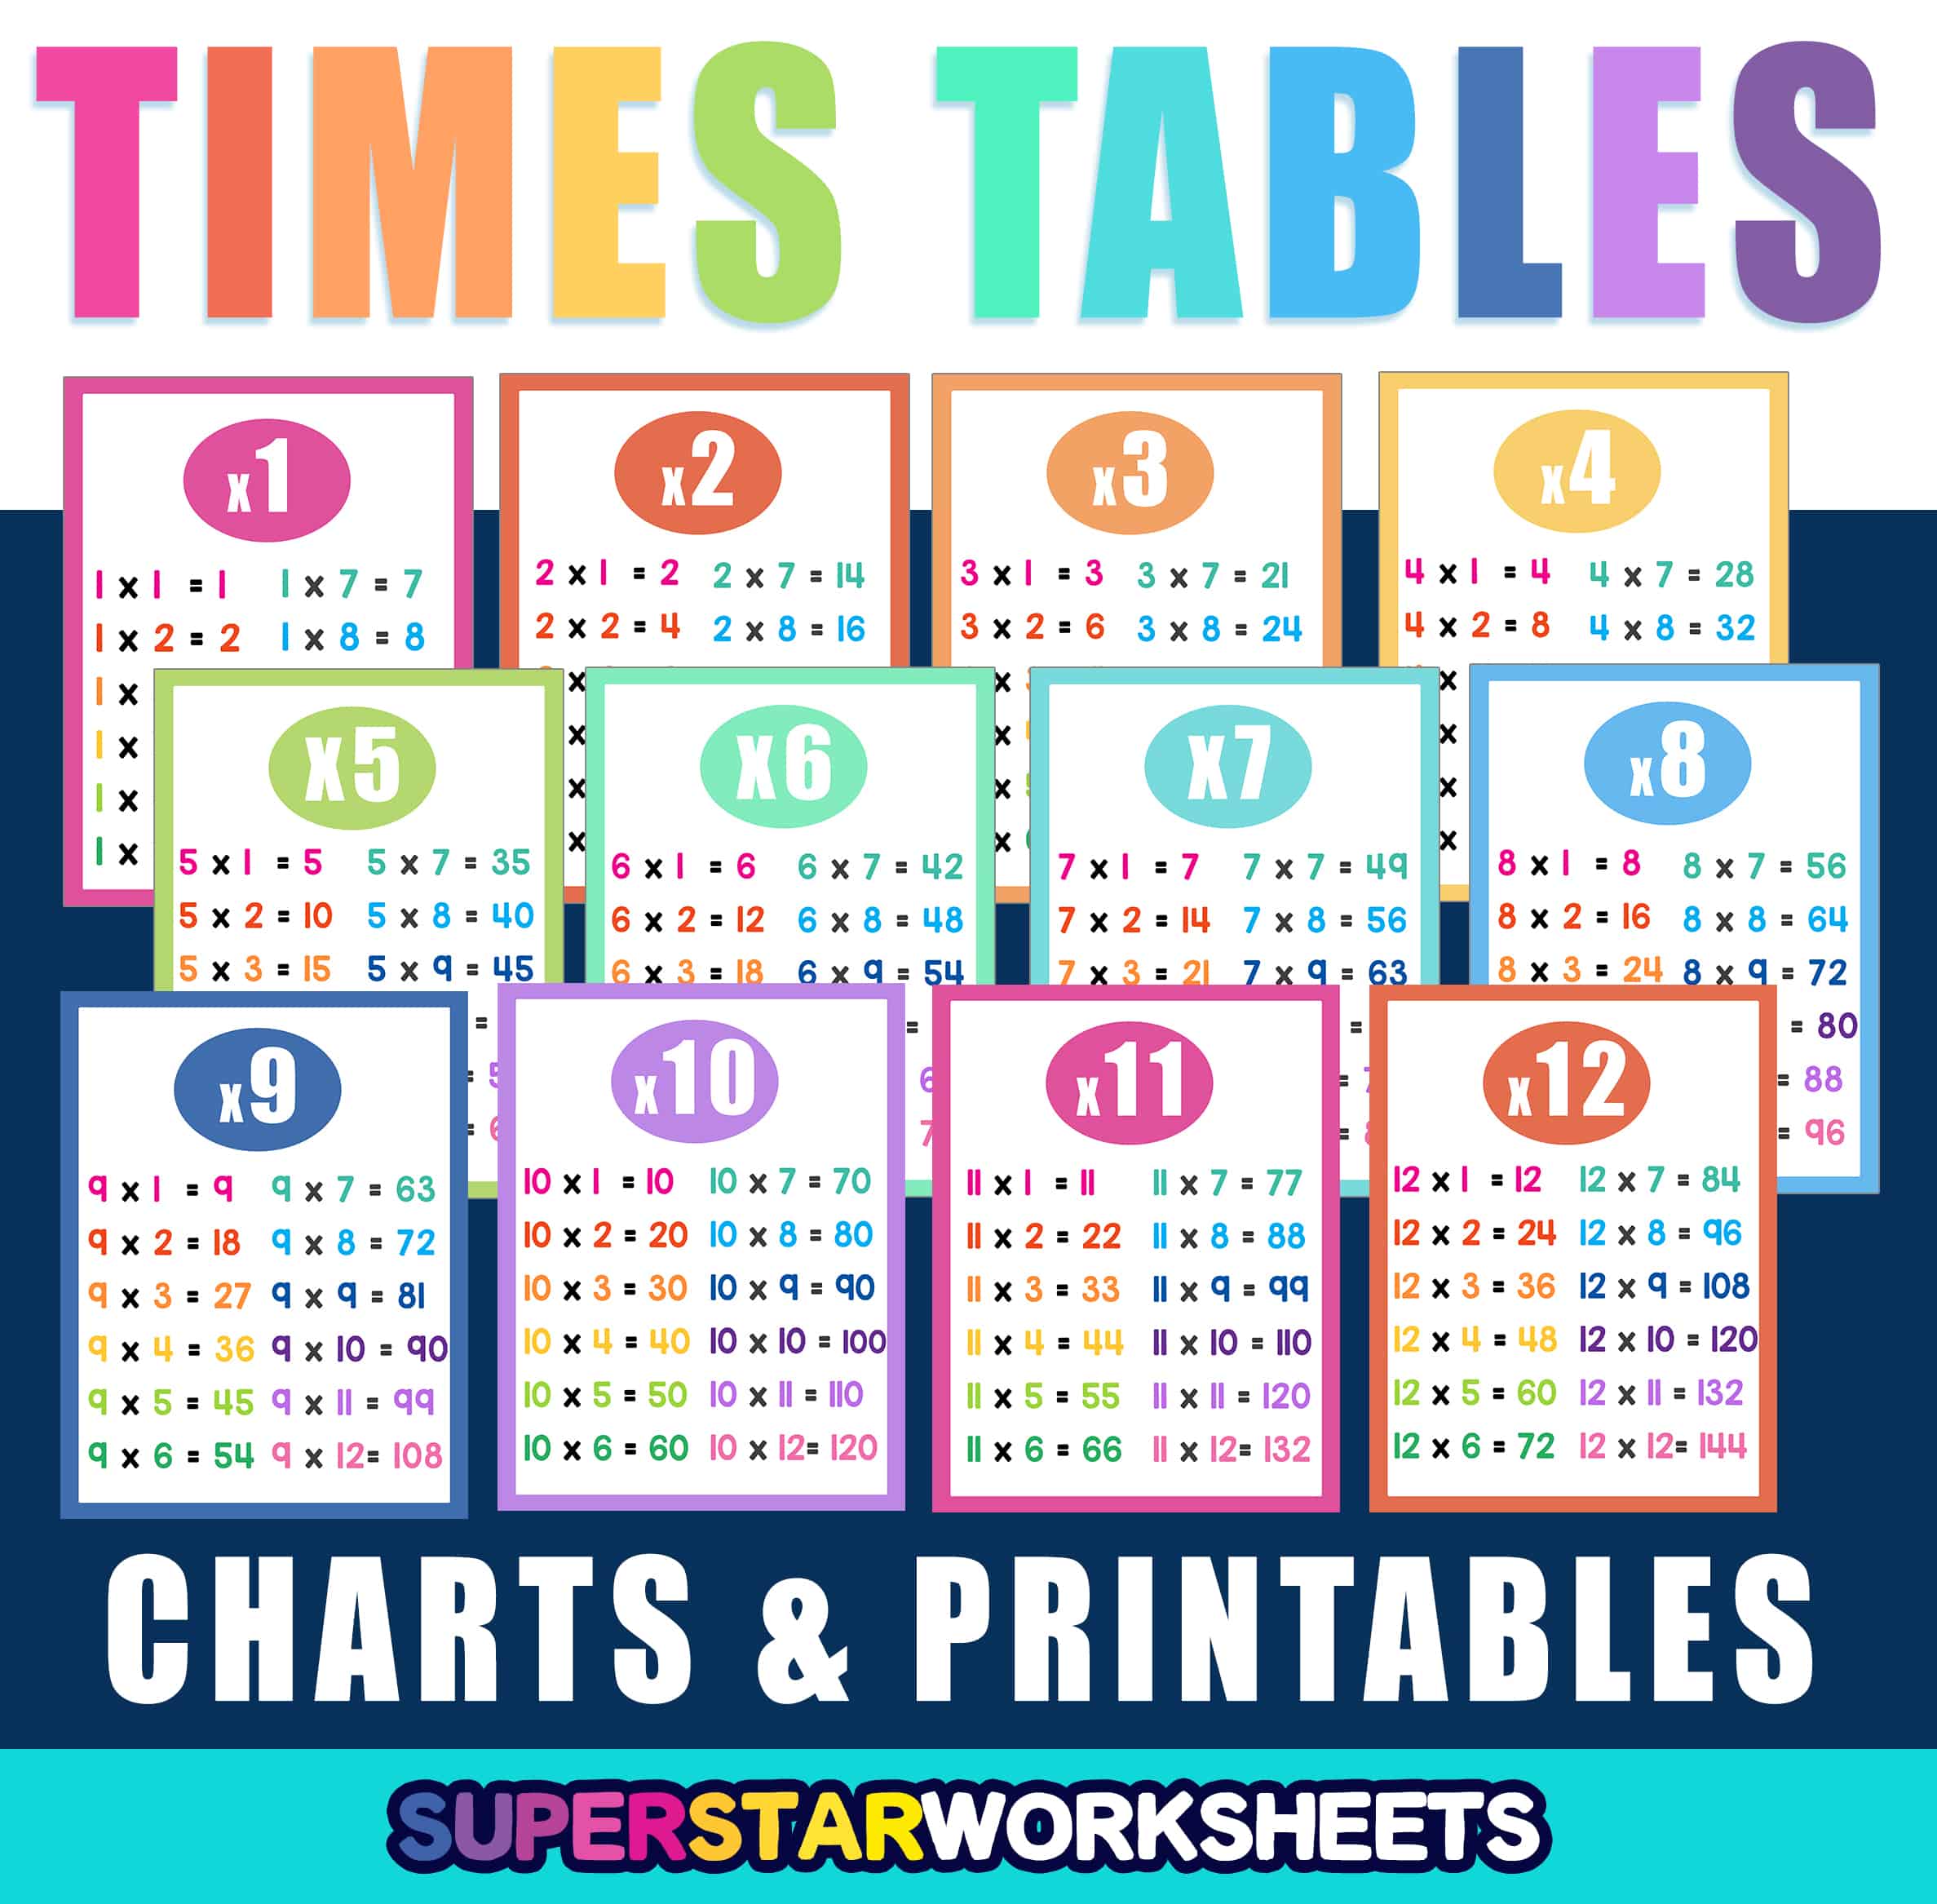 Times Table Charts - Superstar Worksheets